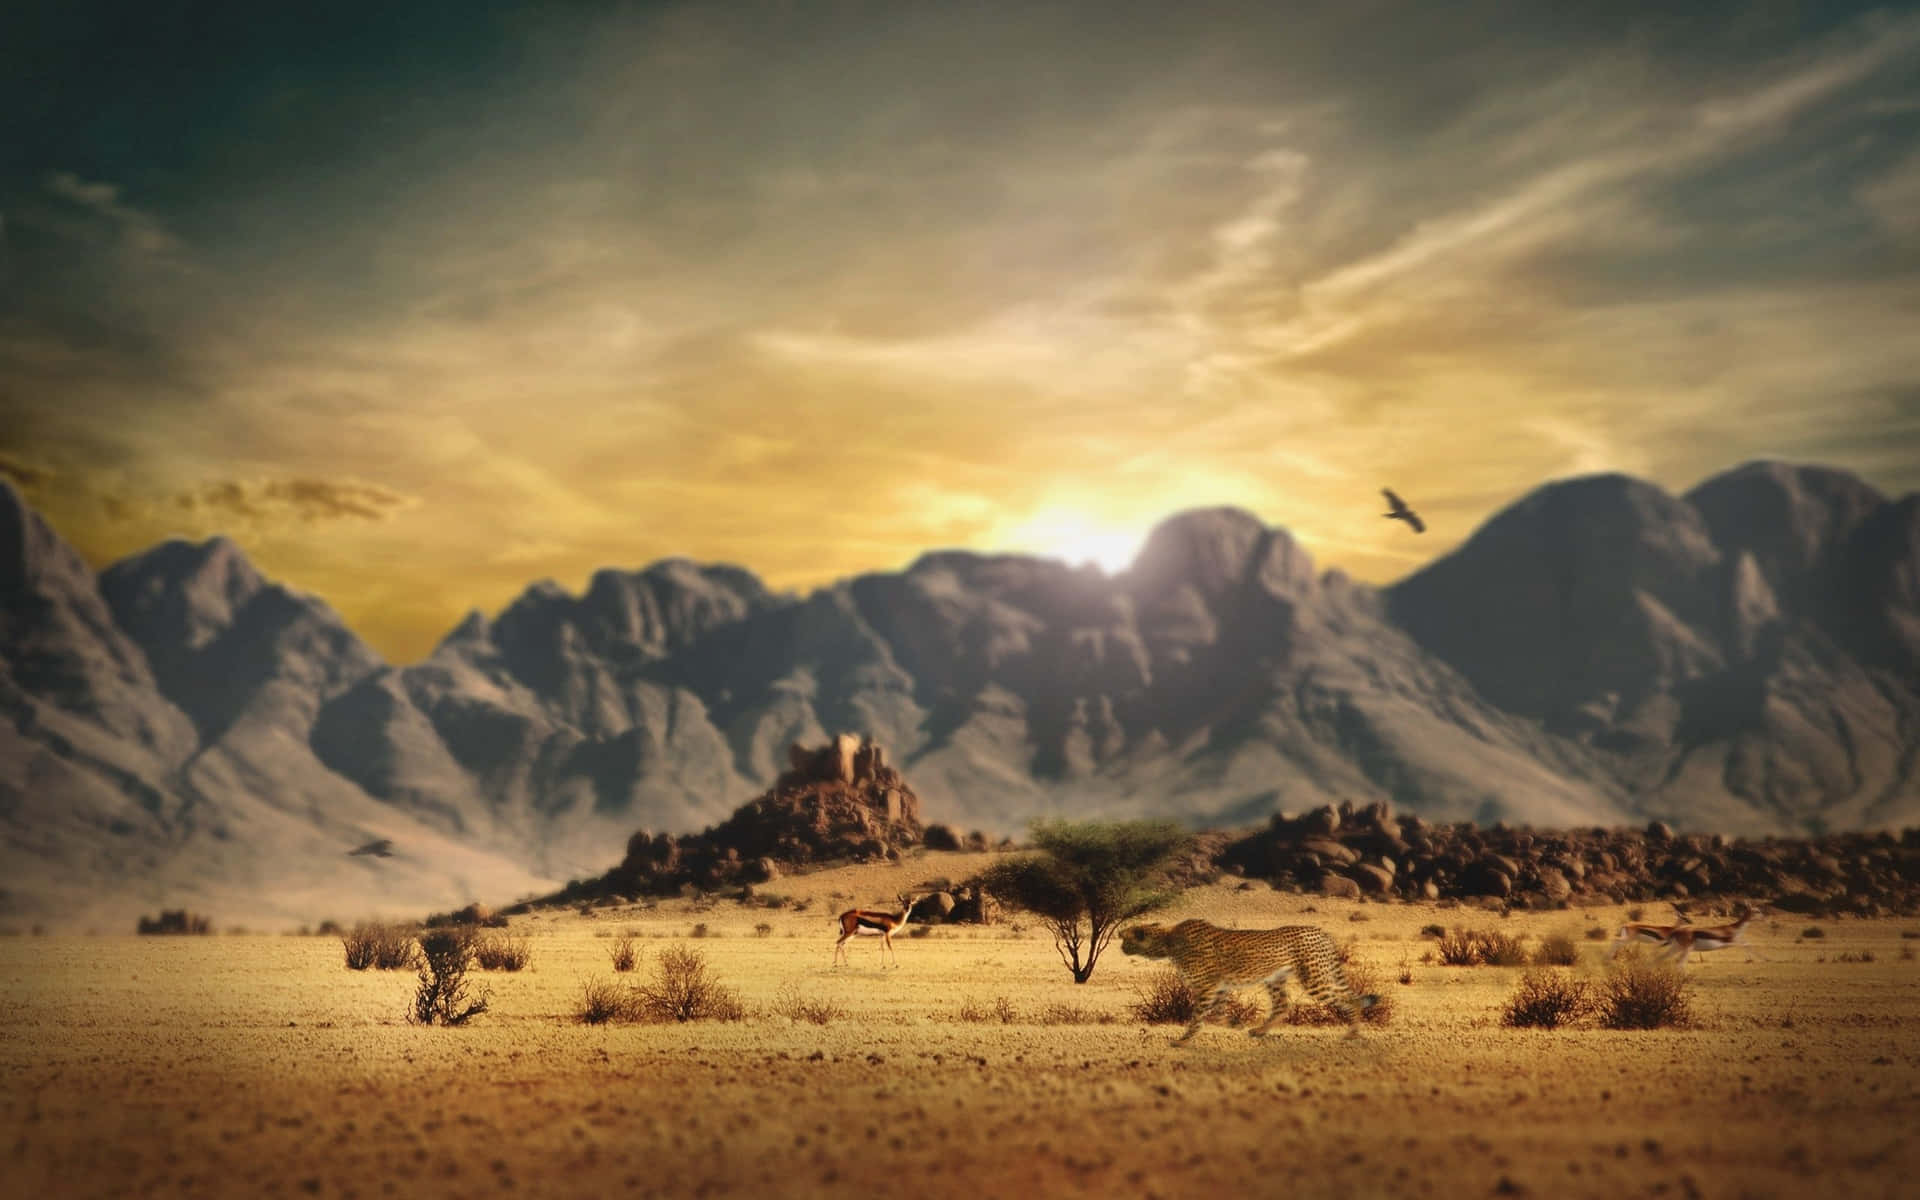 Explore the Wild West with this stunning background.